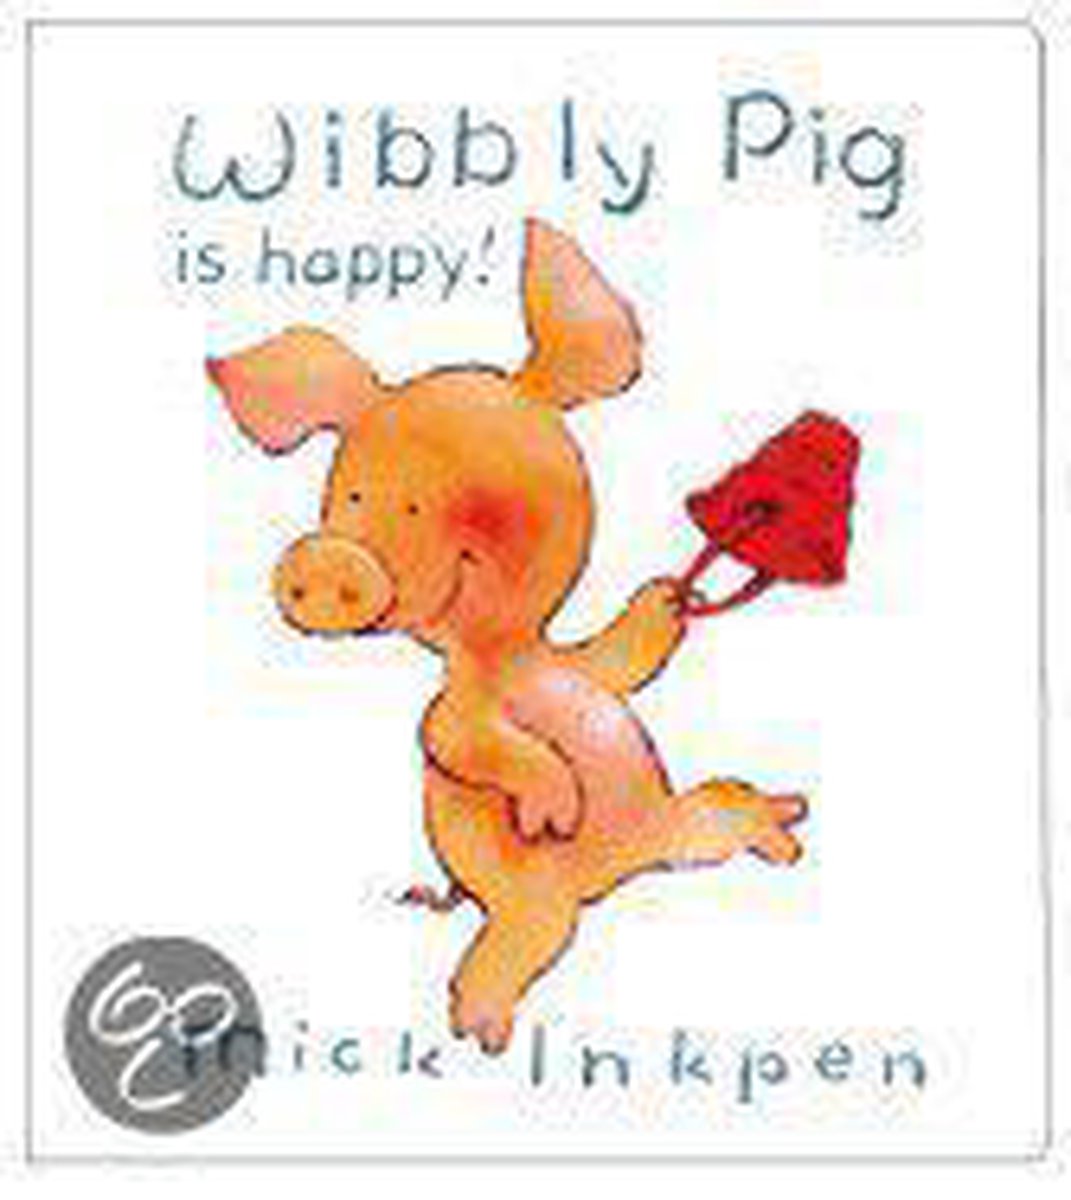 Wibbly Pig Is Happy